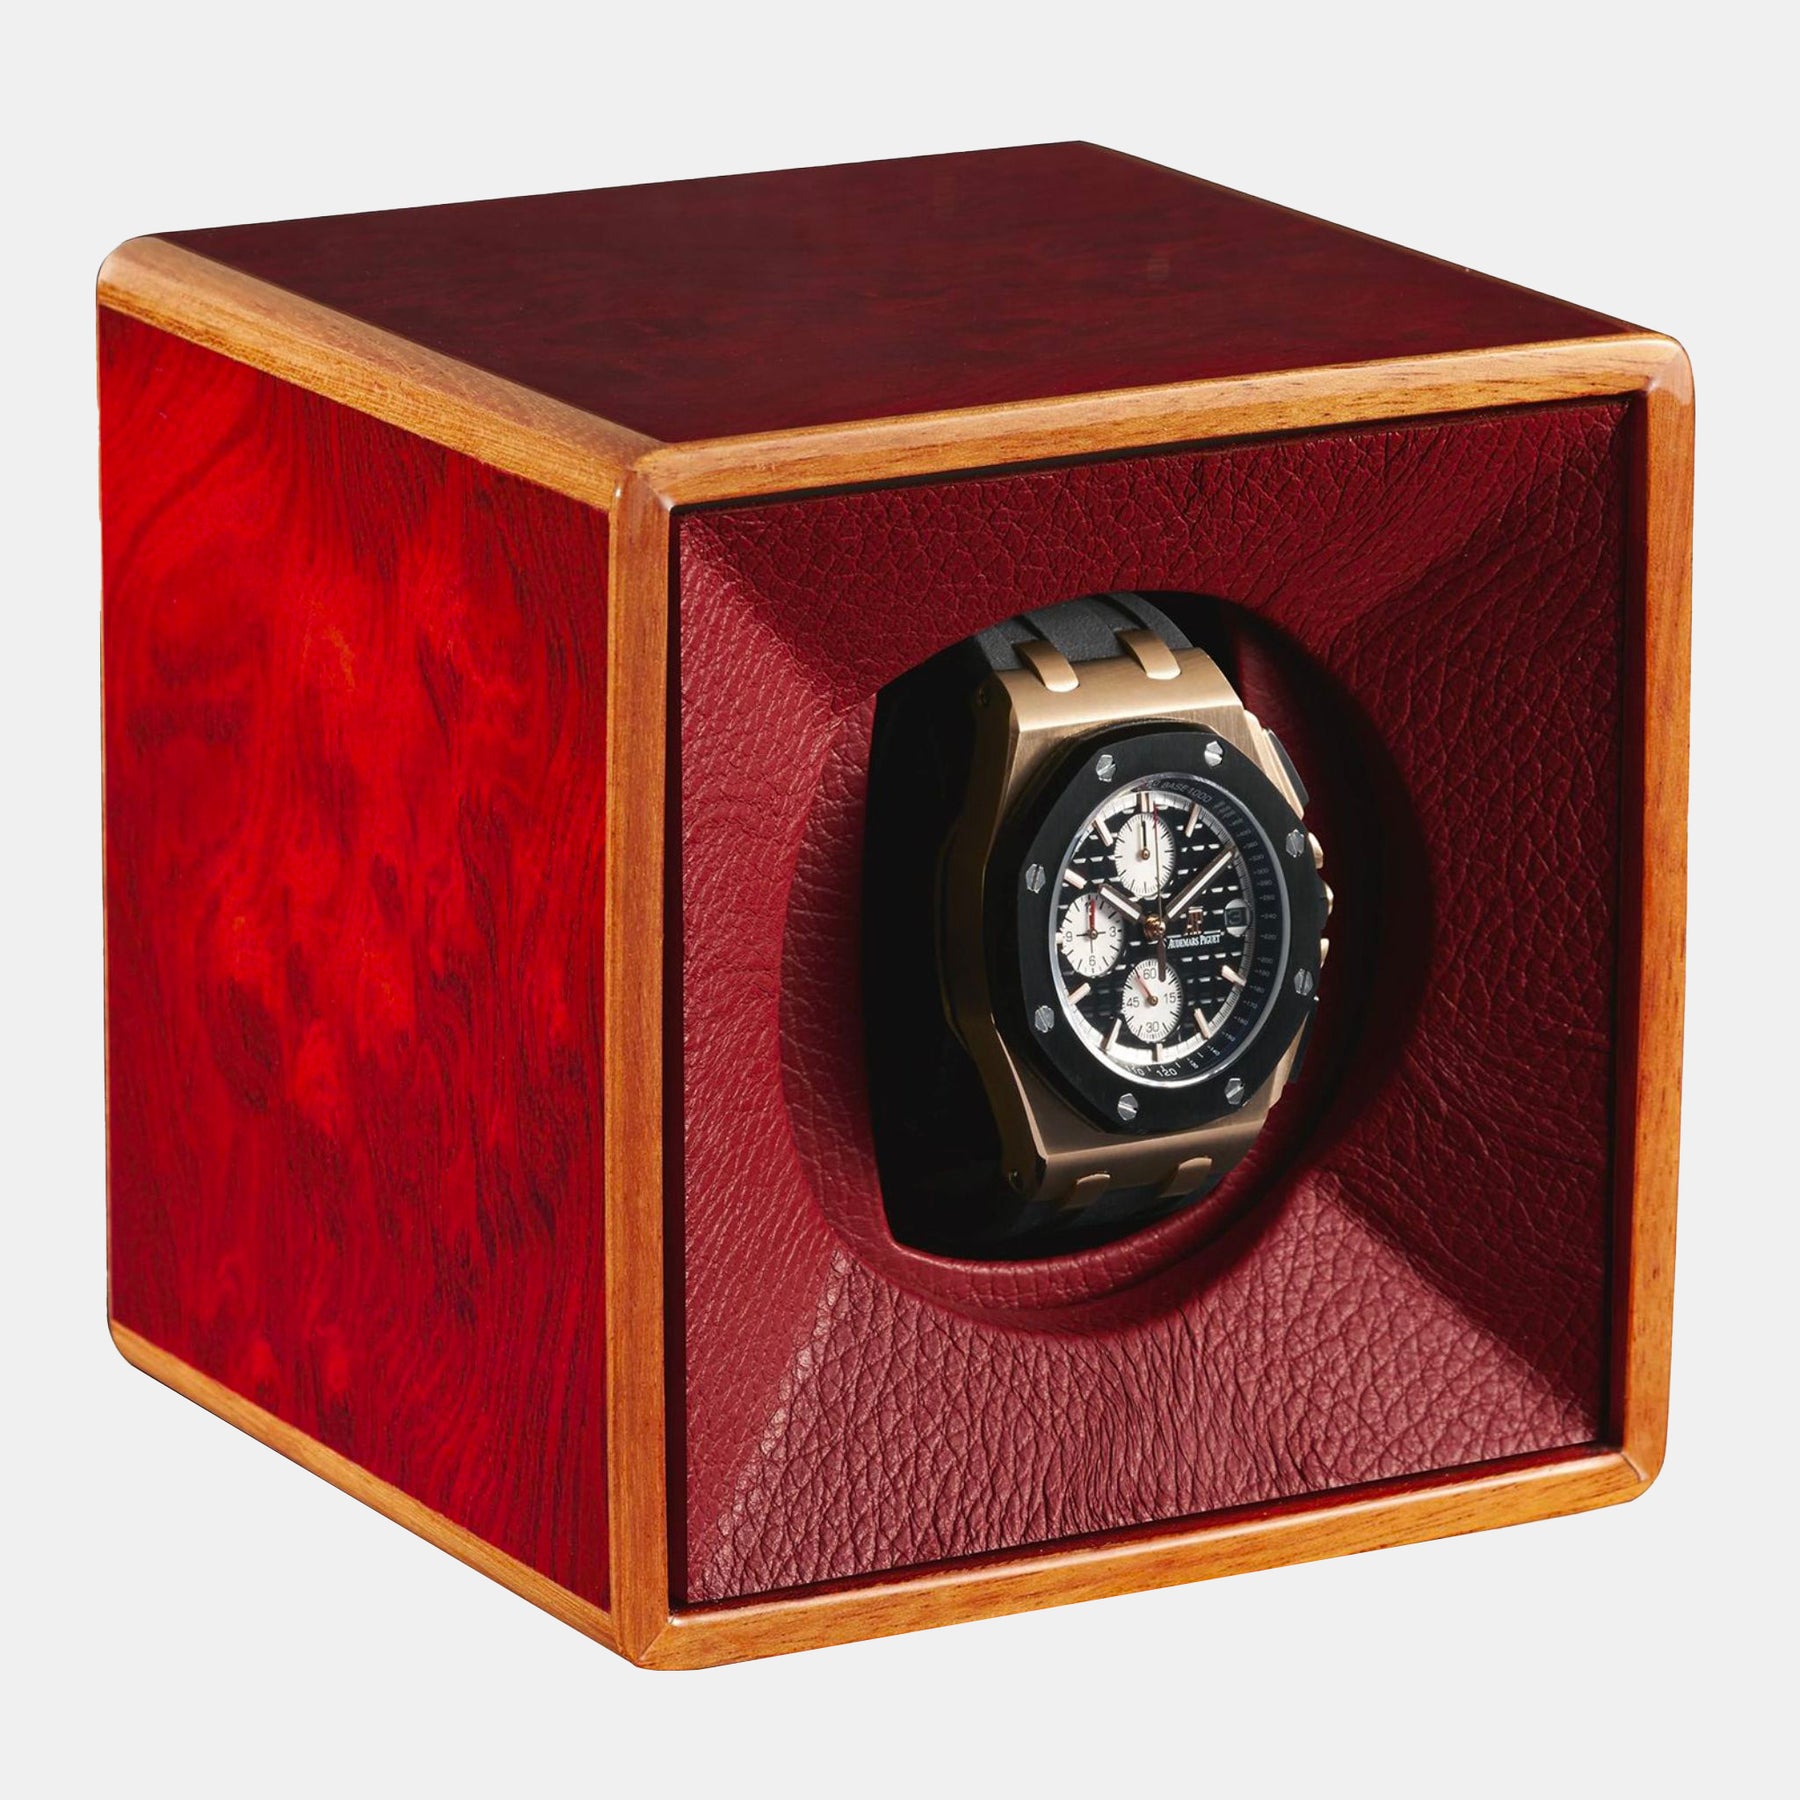 Tempo Unico: Red Briarwood Winder for Automatic Watch